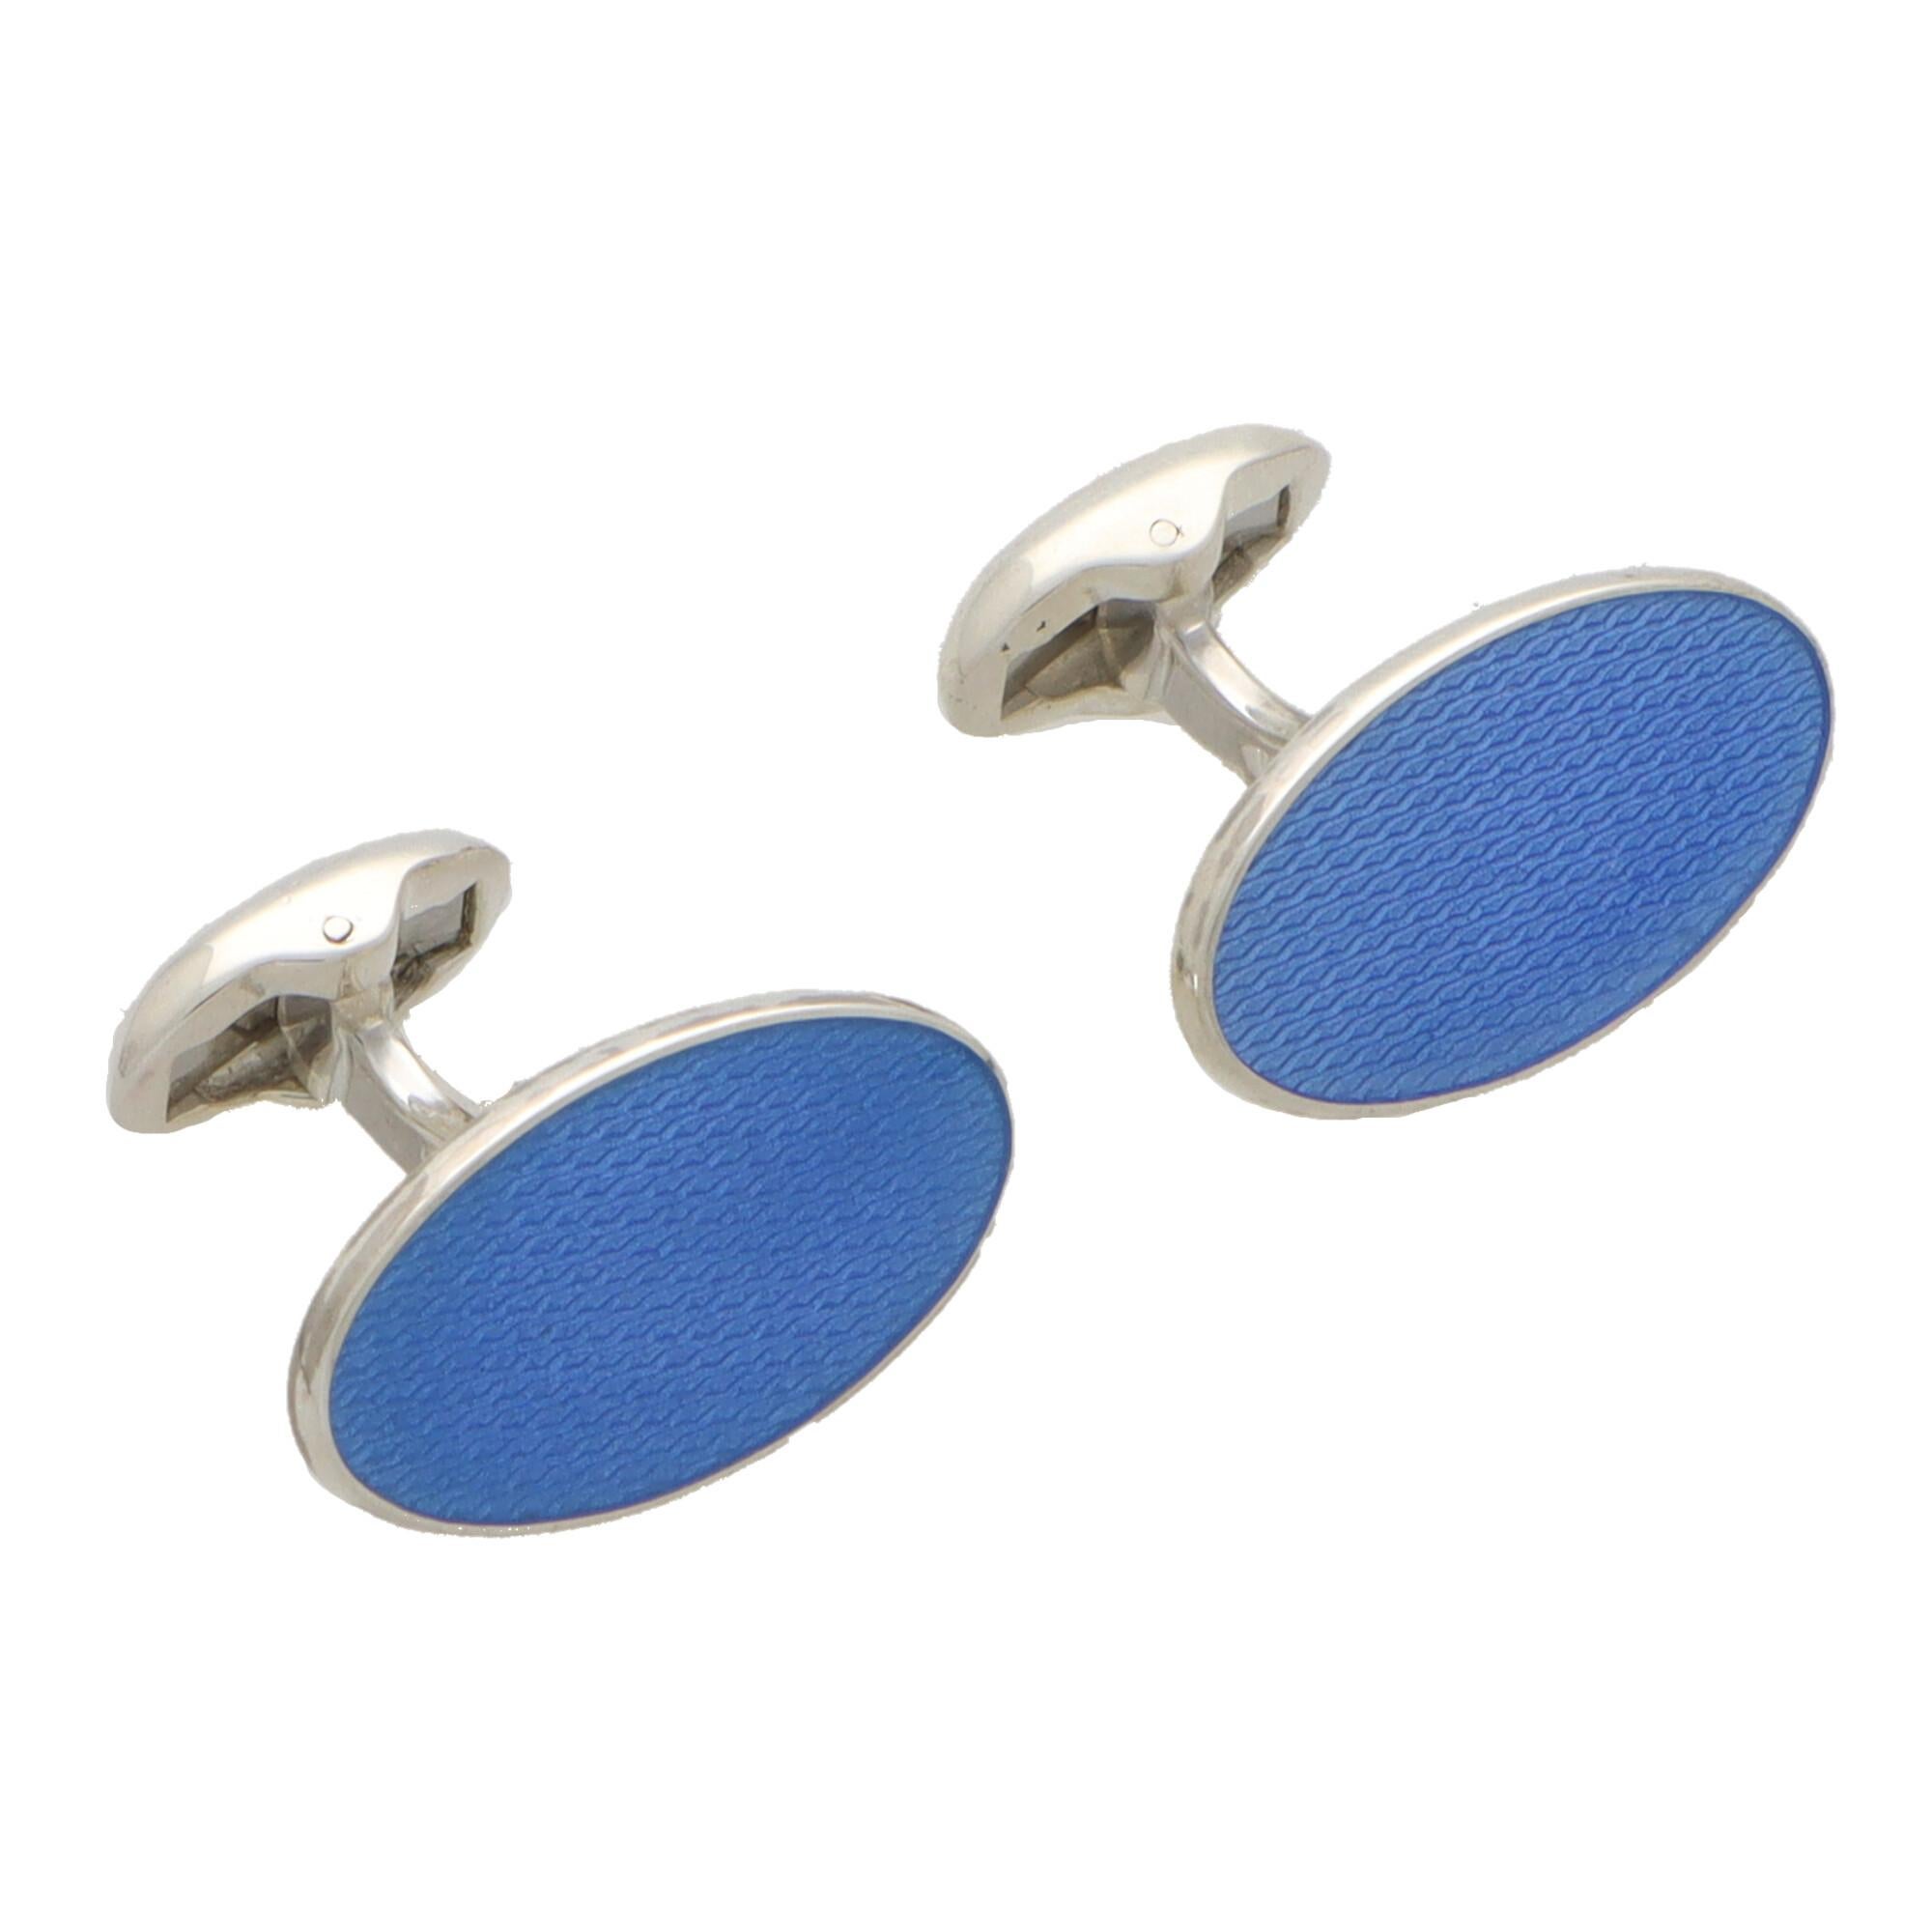  An extremely striking pair of blue elongated oval swivel back cufflinks made in British sterling silver.

Each cufflink is composed of two elongated oval faces set with textured light blue enamel. They are secured to reverse with a swivel back